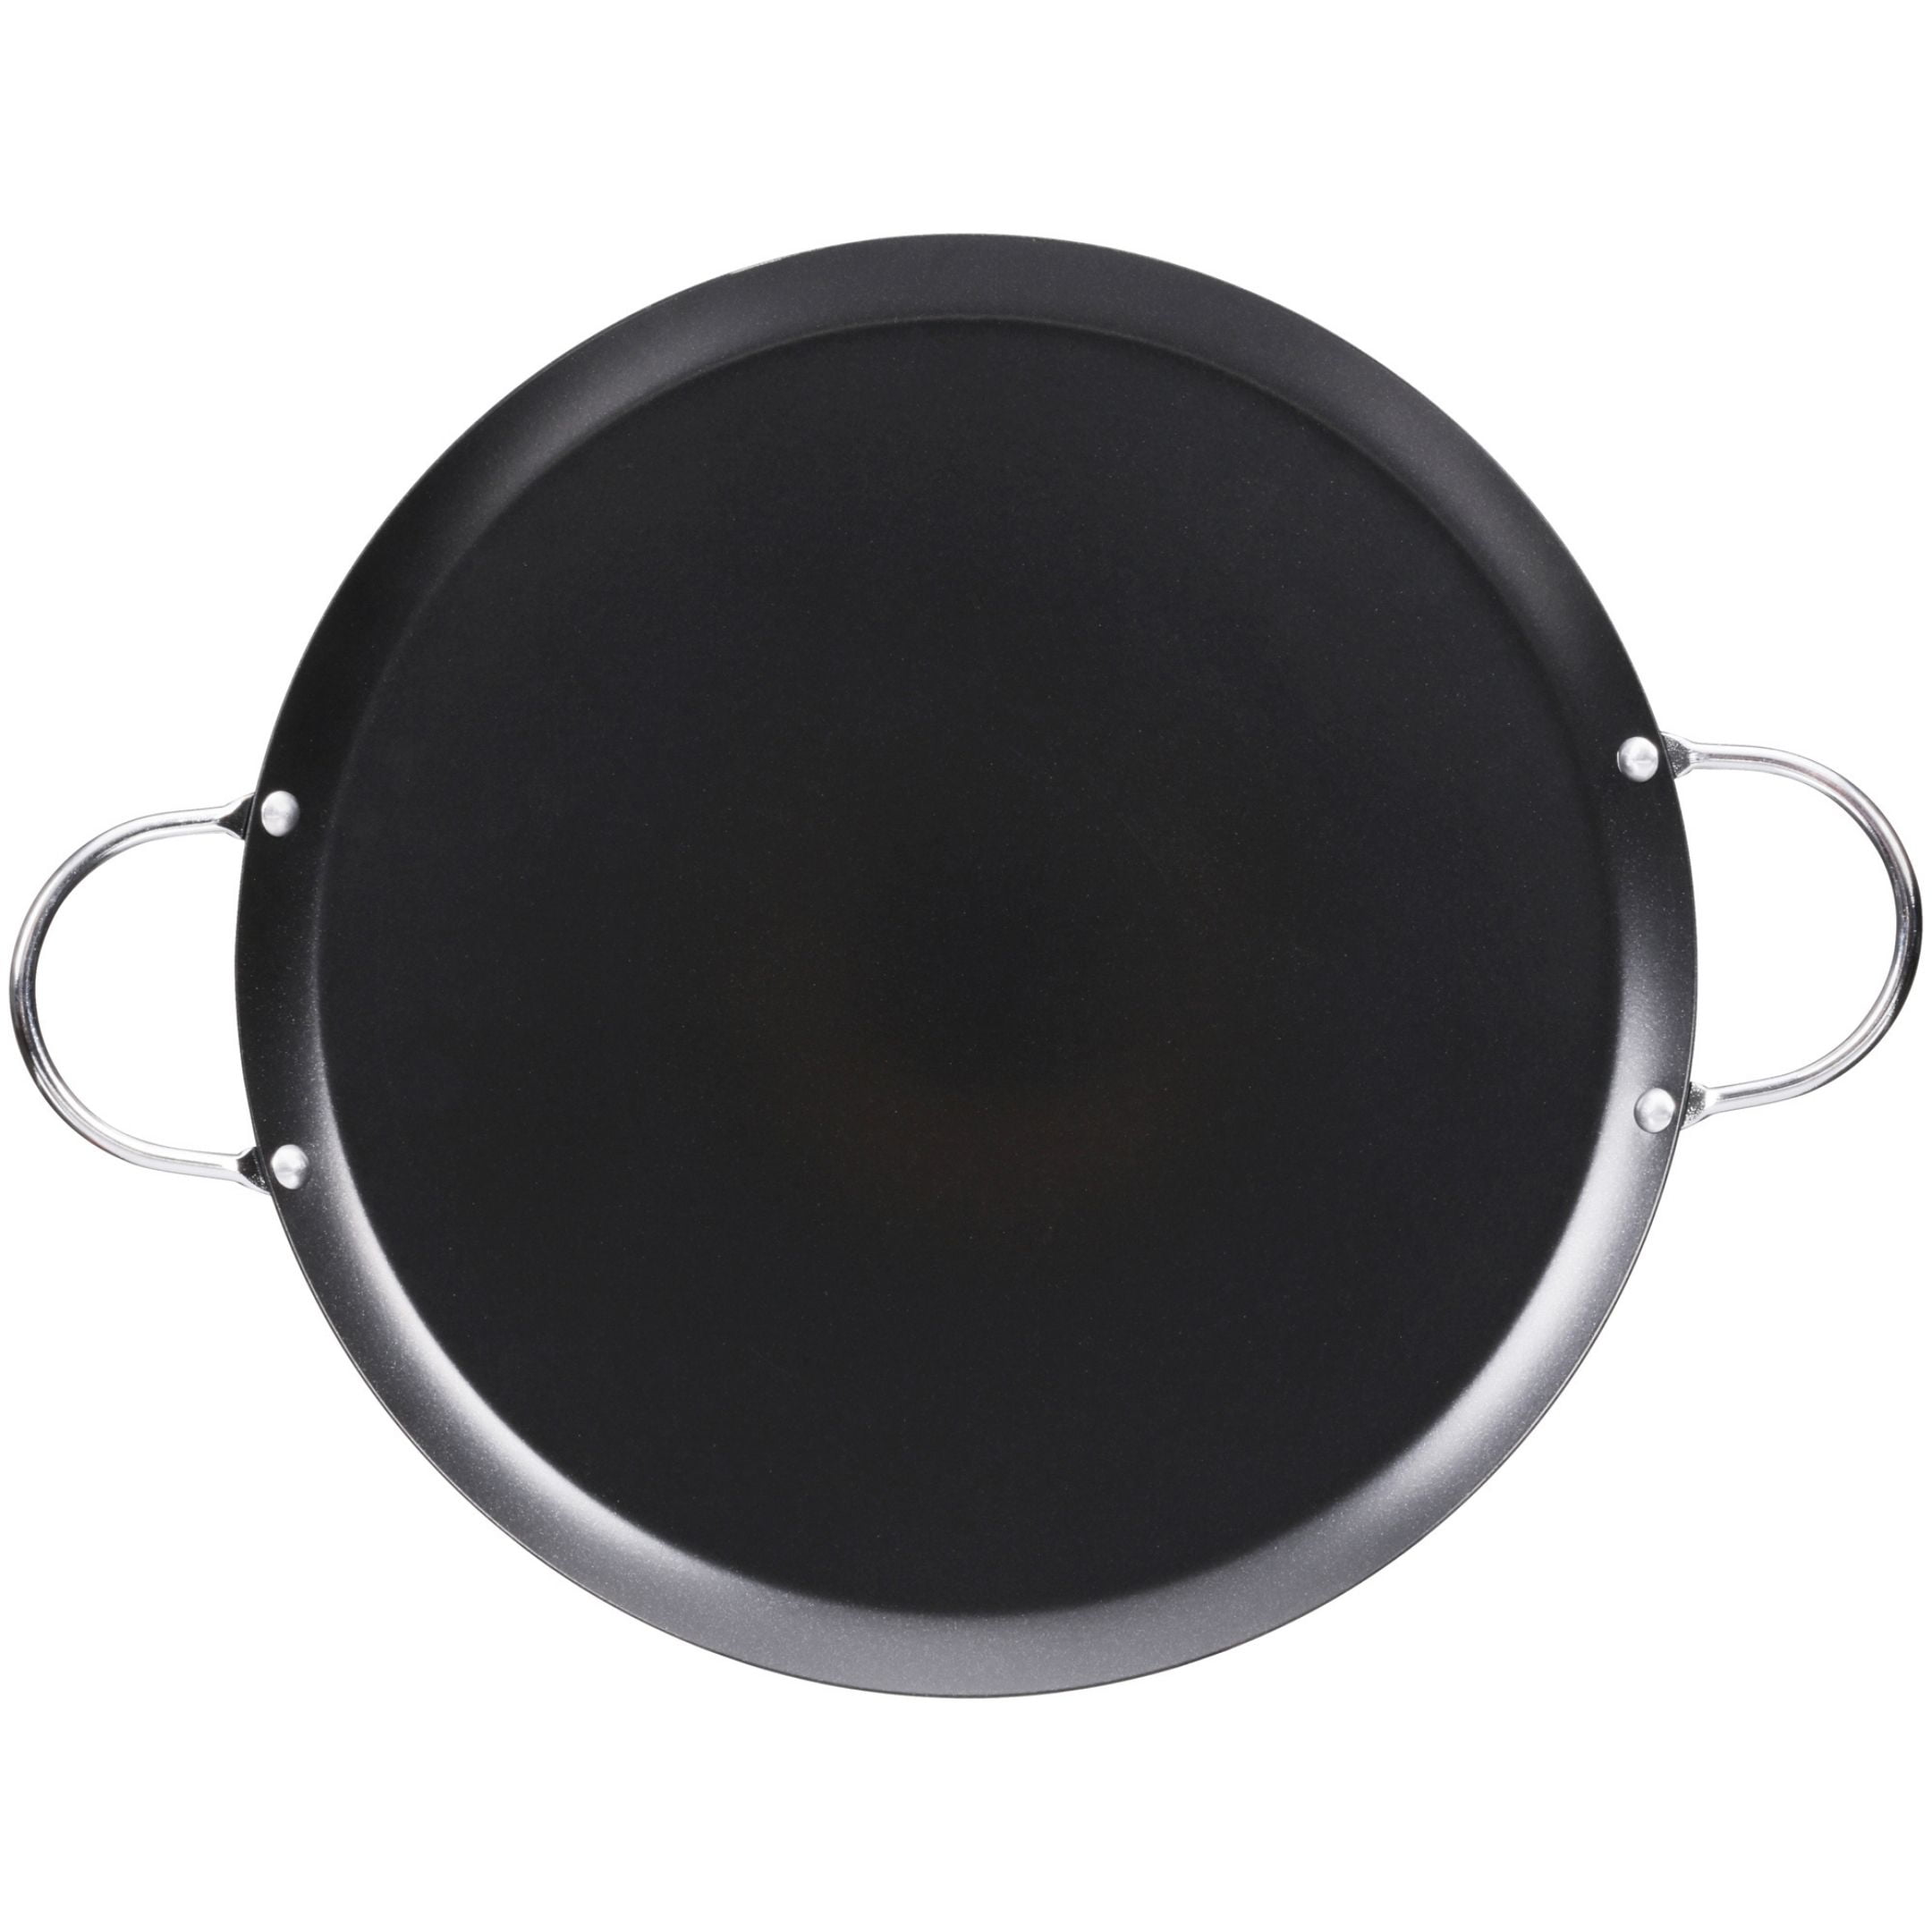 Imusa 9.5 inch Pre-seasoned Round Cast Iron Comal, Griddle/Grill